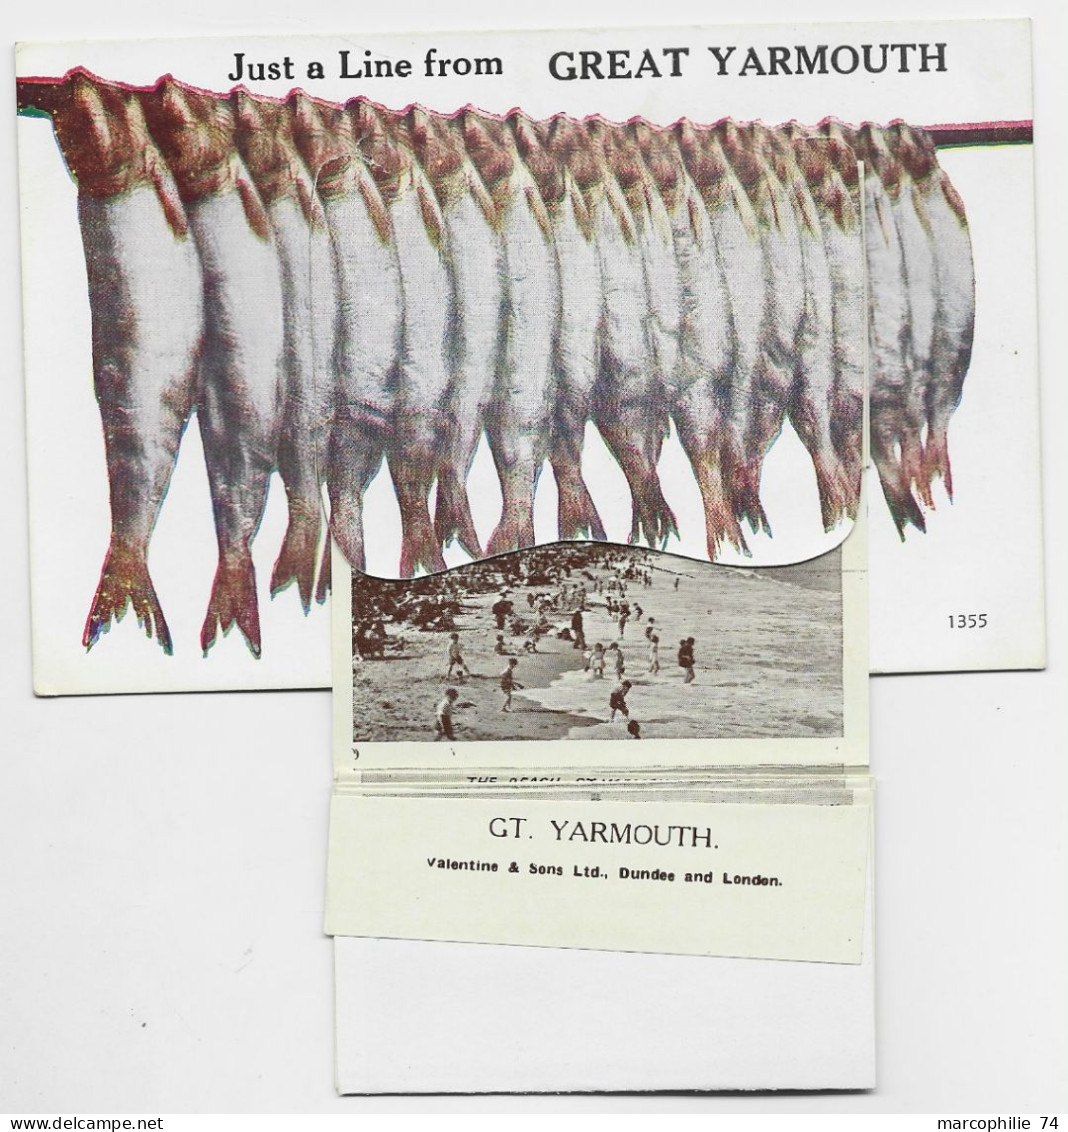 ENGLAND CARD JUST A LINE FROM GREAT YARMOUTH - Great Yarmouth